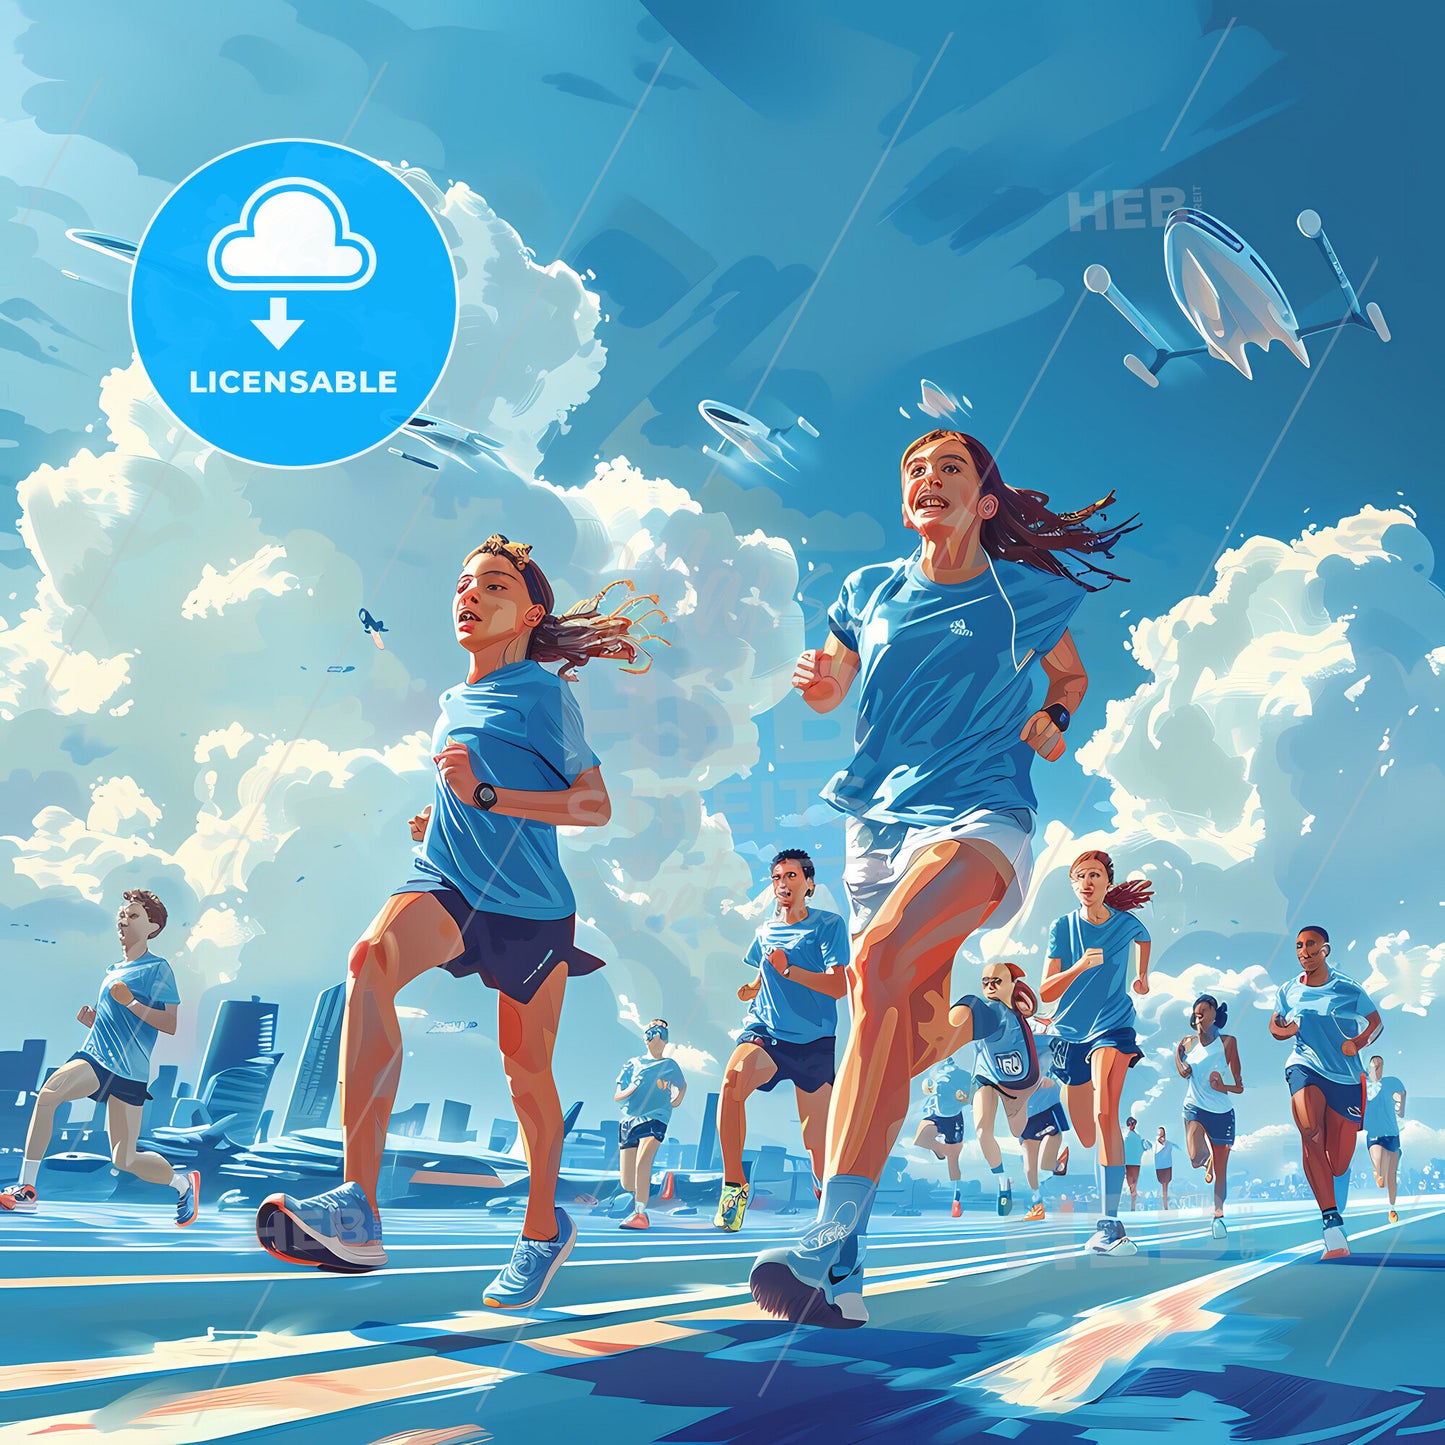 Dynamic painting of young runners in blue against vibrant sky, featuring a group of people in a spirited race